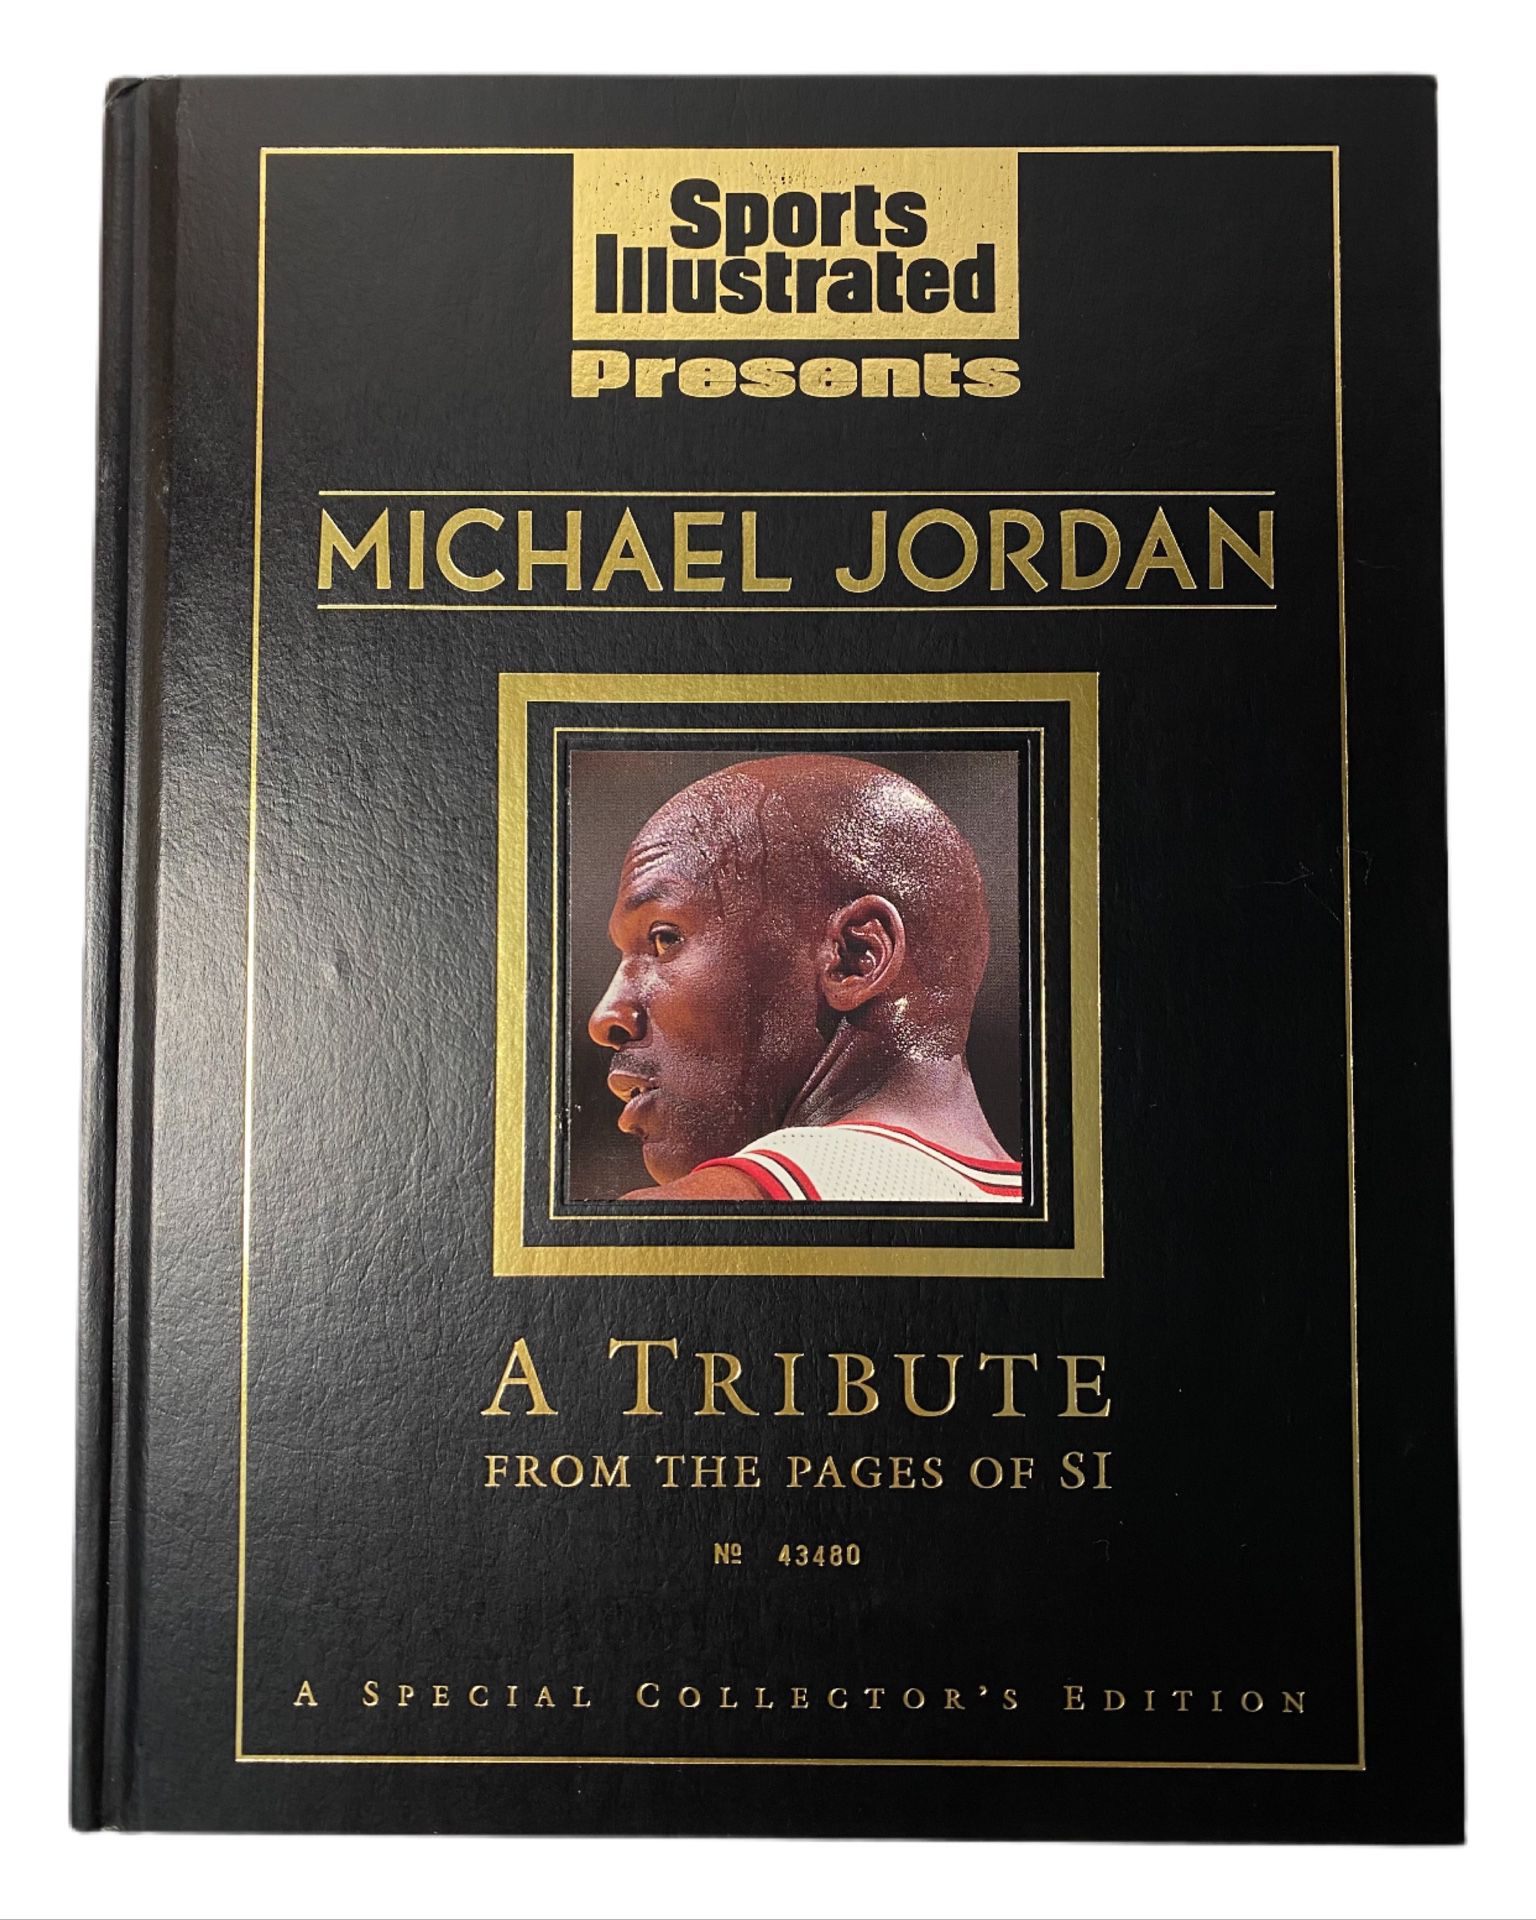 Sports Illustrated Presents Michael Jordan (A Tribute From The Pages of Si), A Special Collector’s Edition